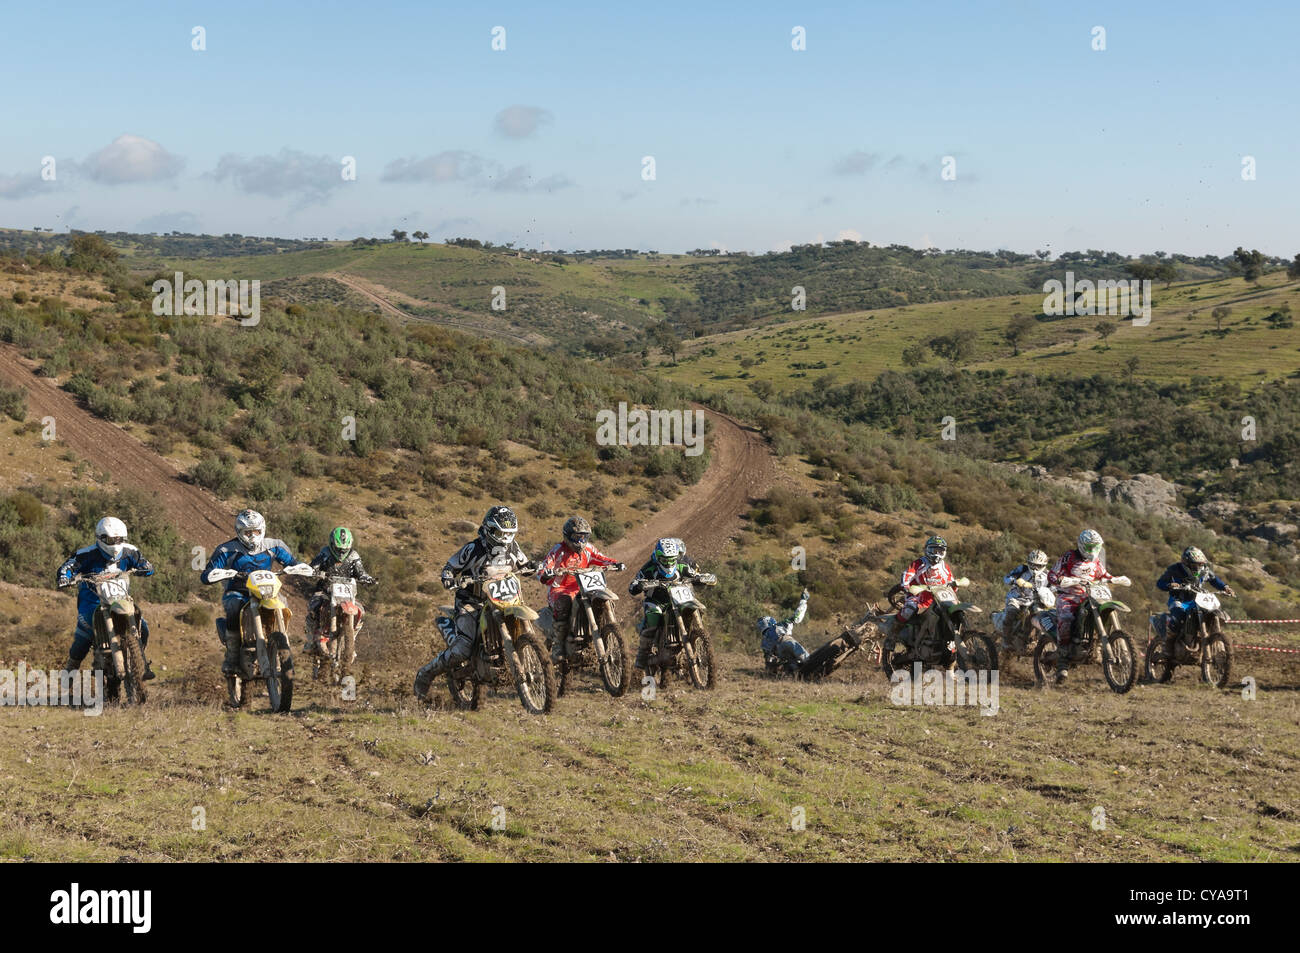 Overview of the riders lined up at the starting line of the motocross track of Safara, Alentejo, portugal Stock Photo